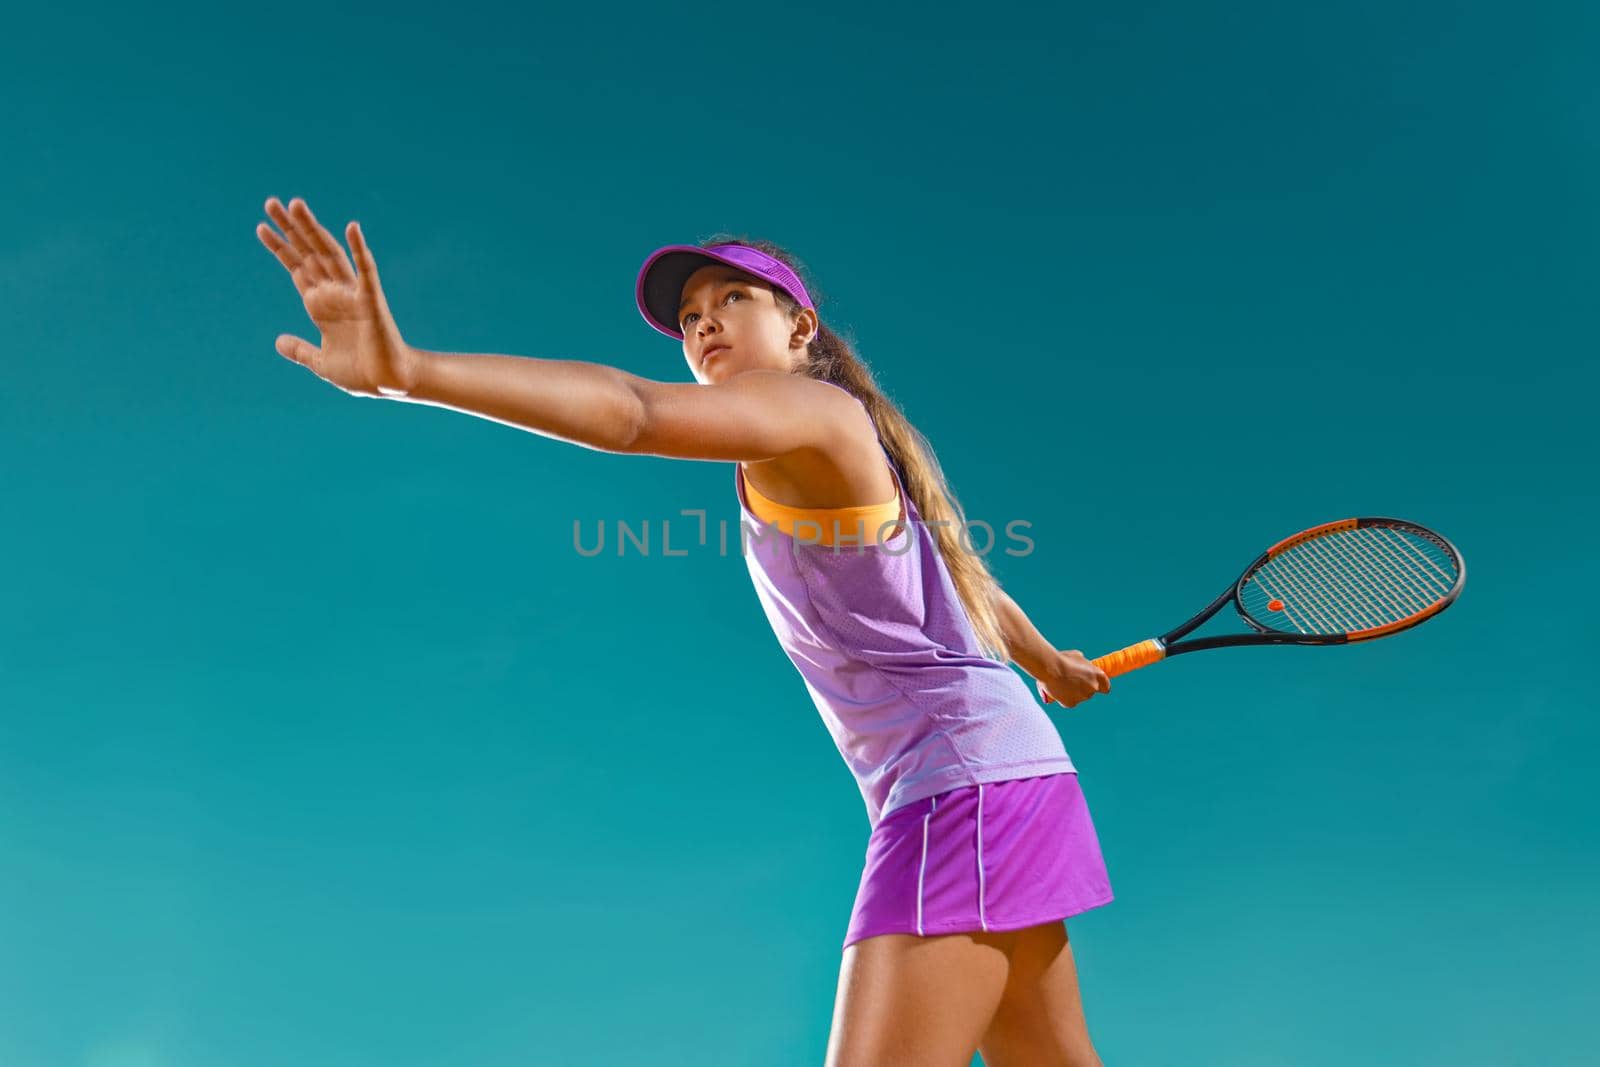 Beautiful girl tennis player with a racket on dark background wiht lights